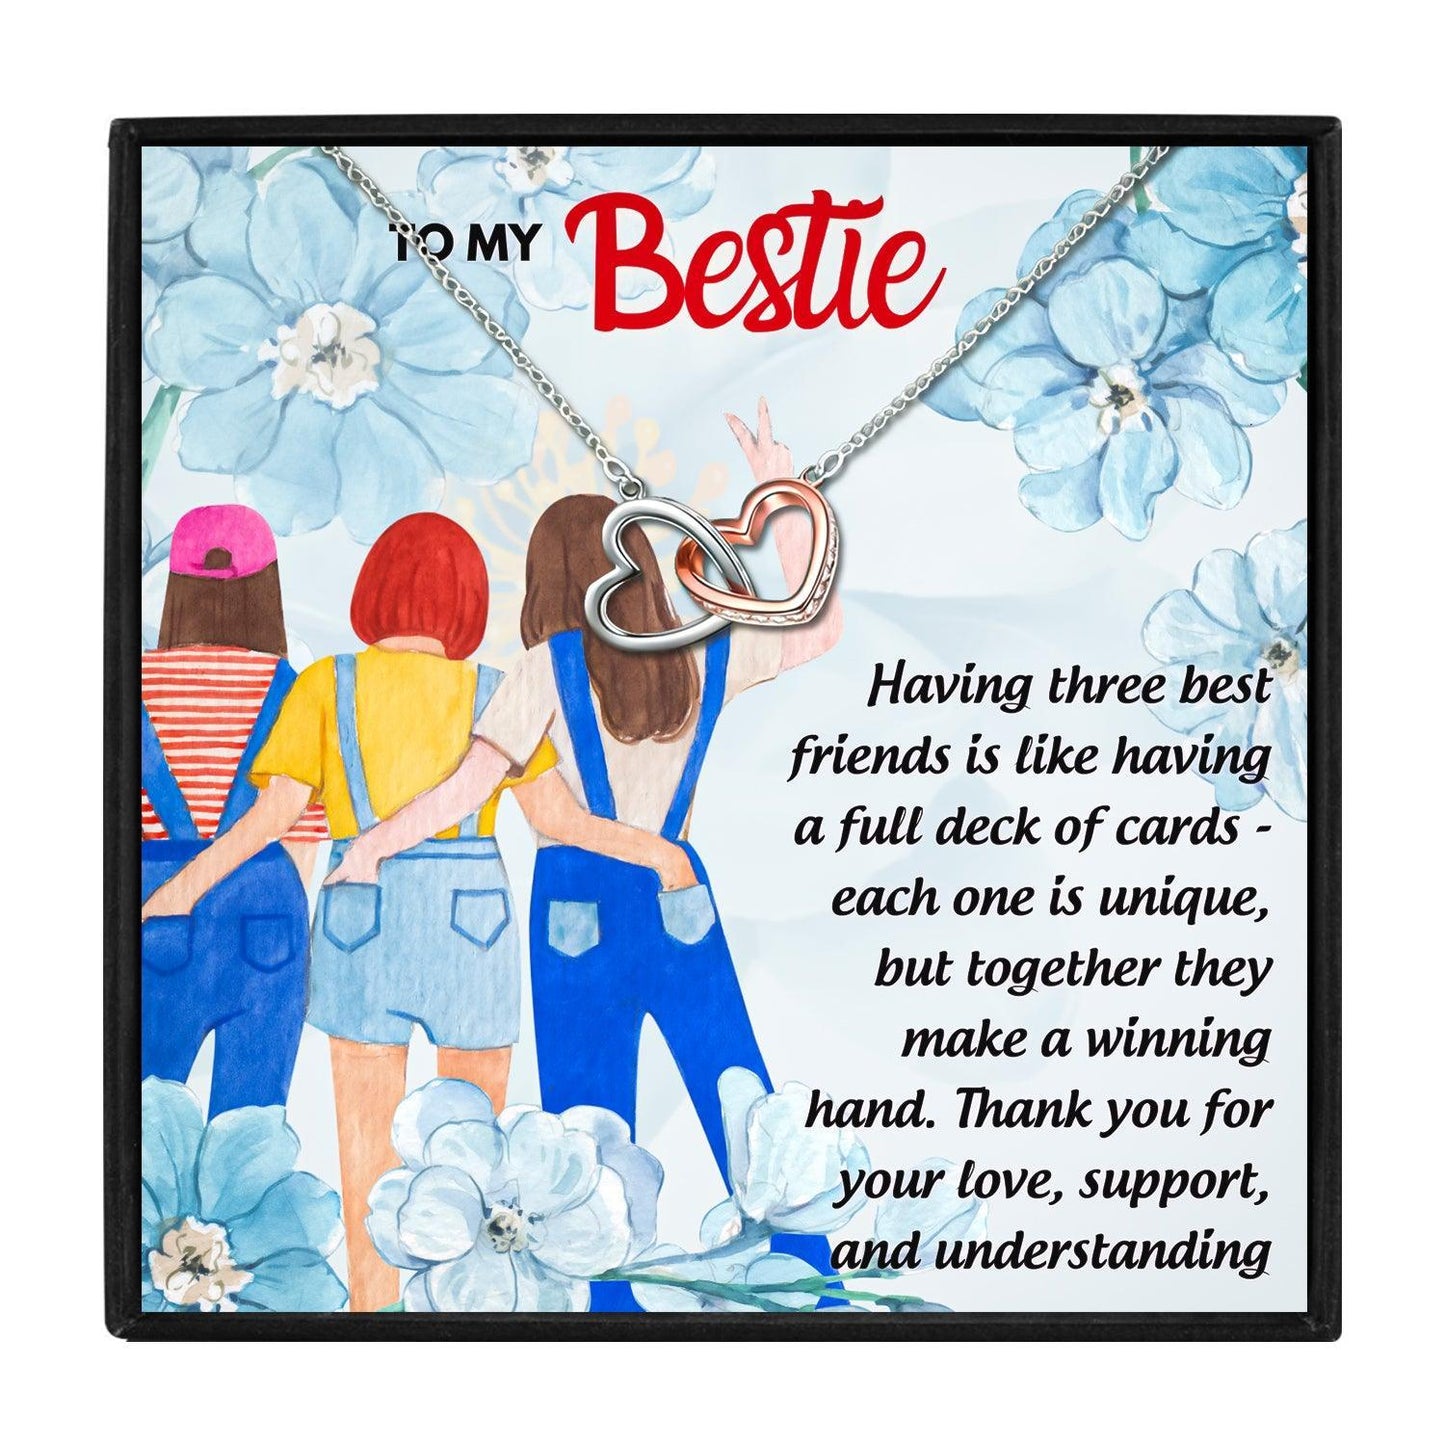 Heartfelt 3 Besties Necklace Gift Set in 2023 | Heartfelt 3 Besties Necklace Gift Set - undefined | Best Friends gift ideas, Friendship necklace, gift for friend, Gift for Girlfriend, To My Bestie Friendship Gift Necklace Set | From Hunny Life | hunnylife.com